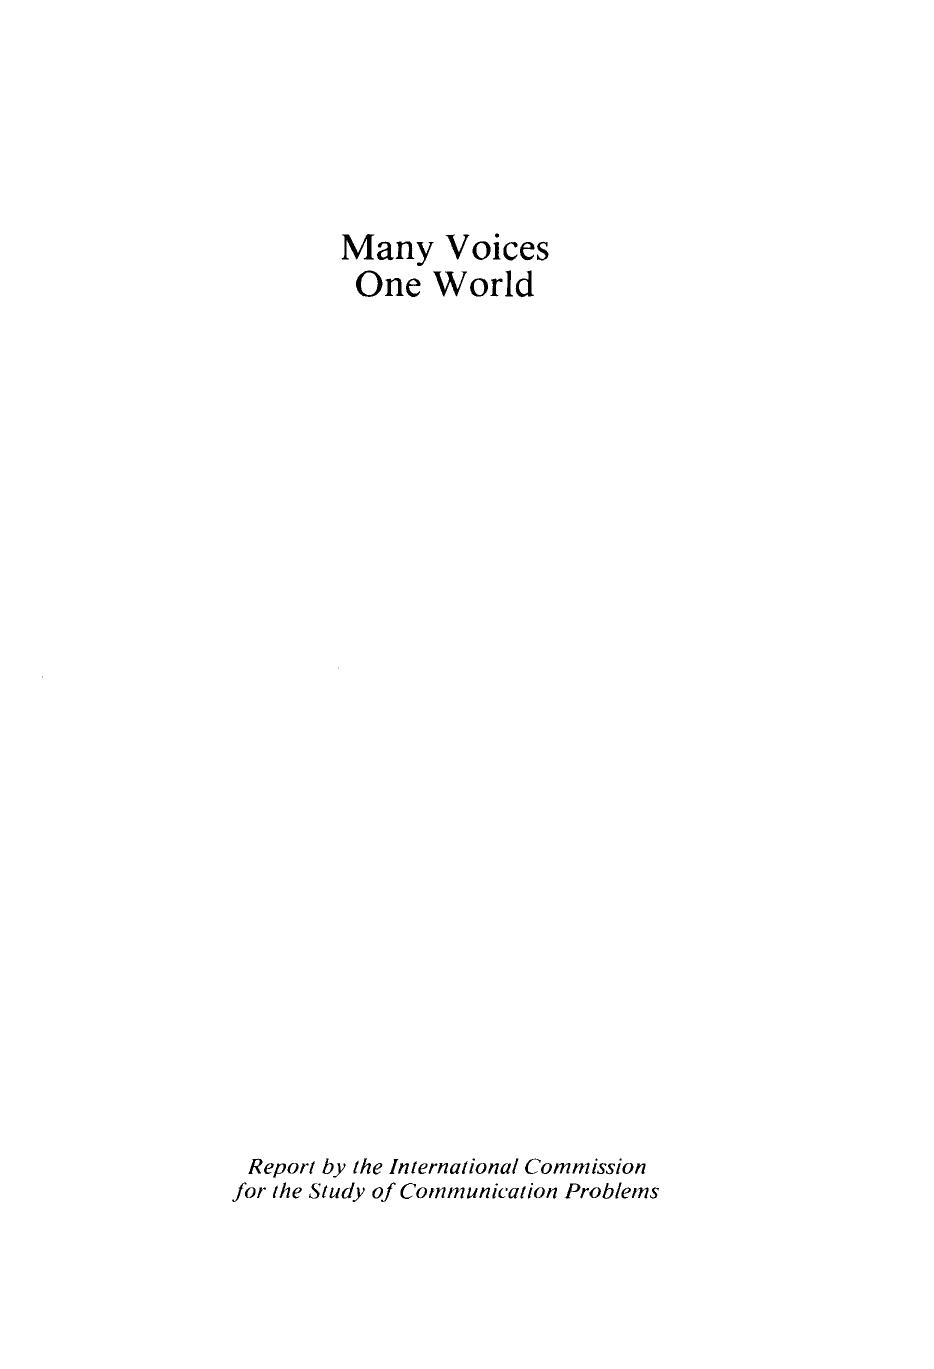 Many voices, one world: towards a new, more just, and more efficient world information and communication order; 1980